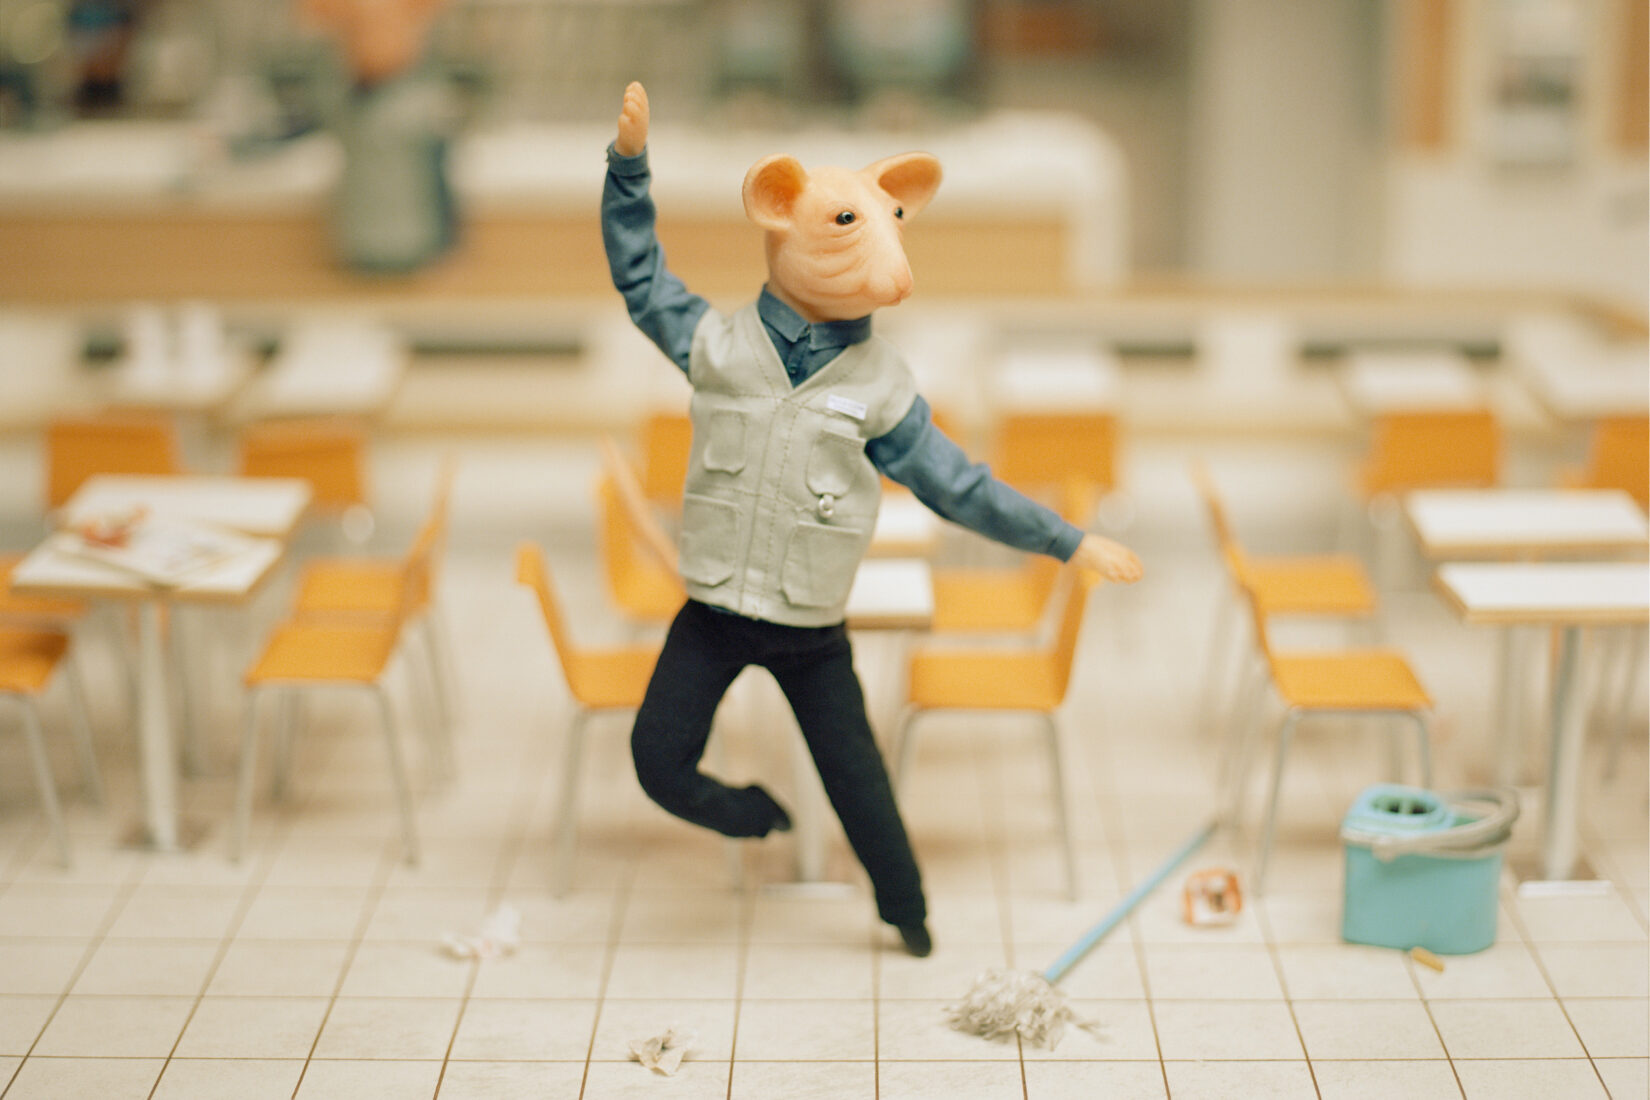 Photo of a miniature mock-up representing an empty canteen with the figure of a mouse dancing, a bucket and a mop abandoned on the floor.